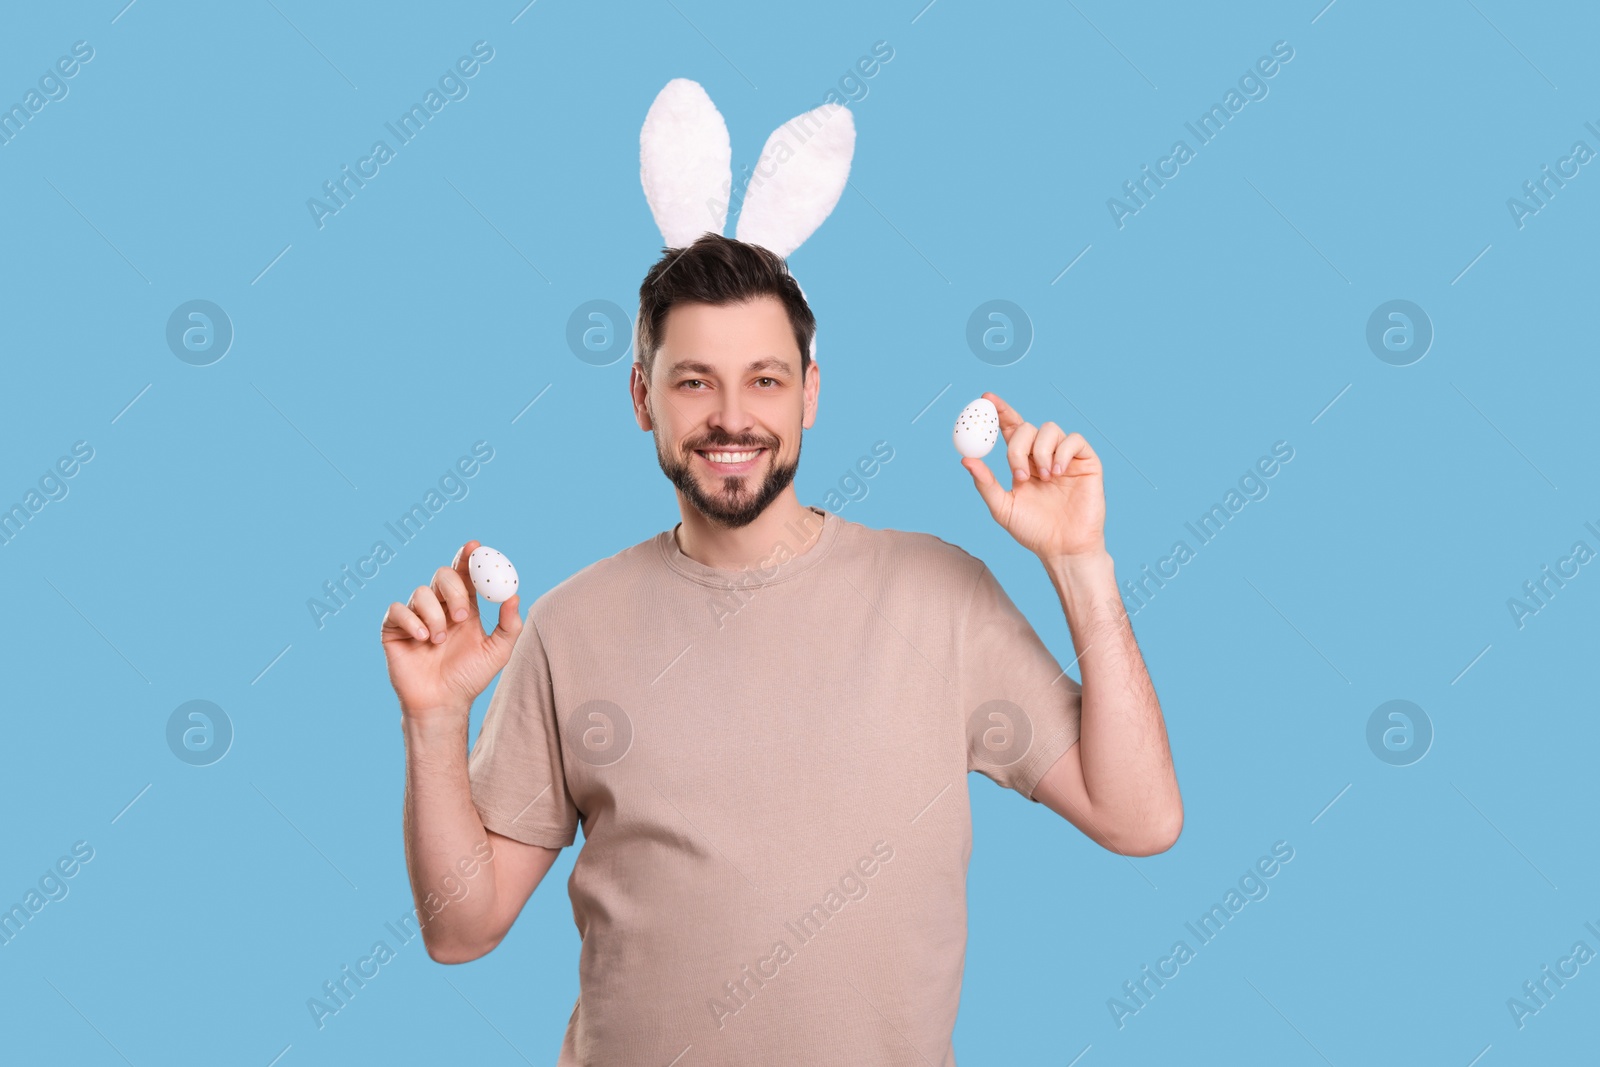 Photo of Happy man in bunny ears headband holding painted Easter eggs on turquoise background